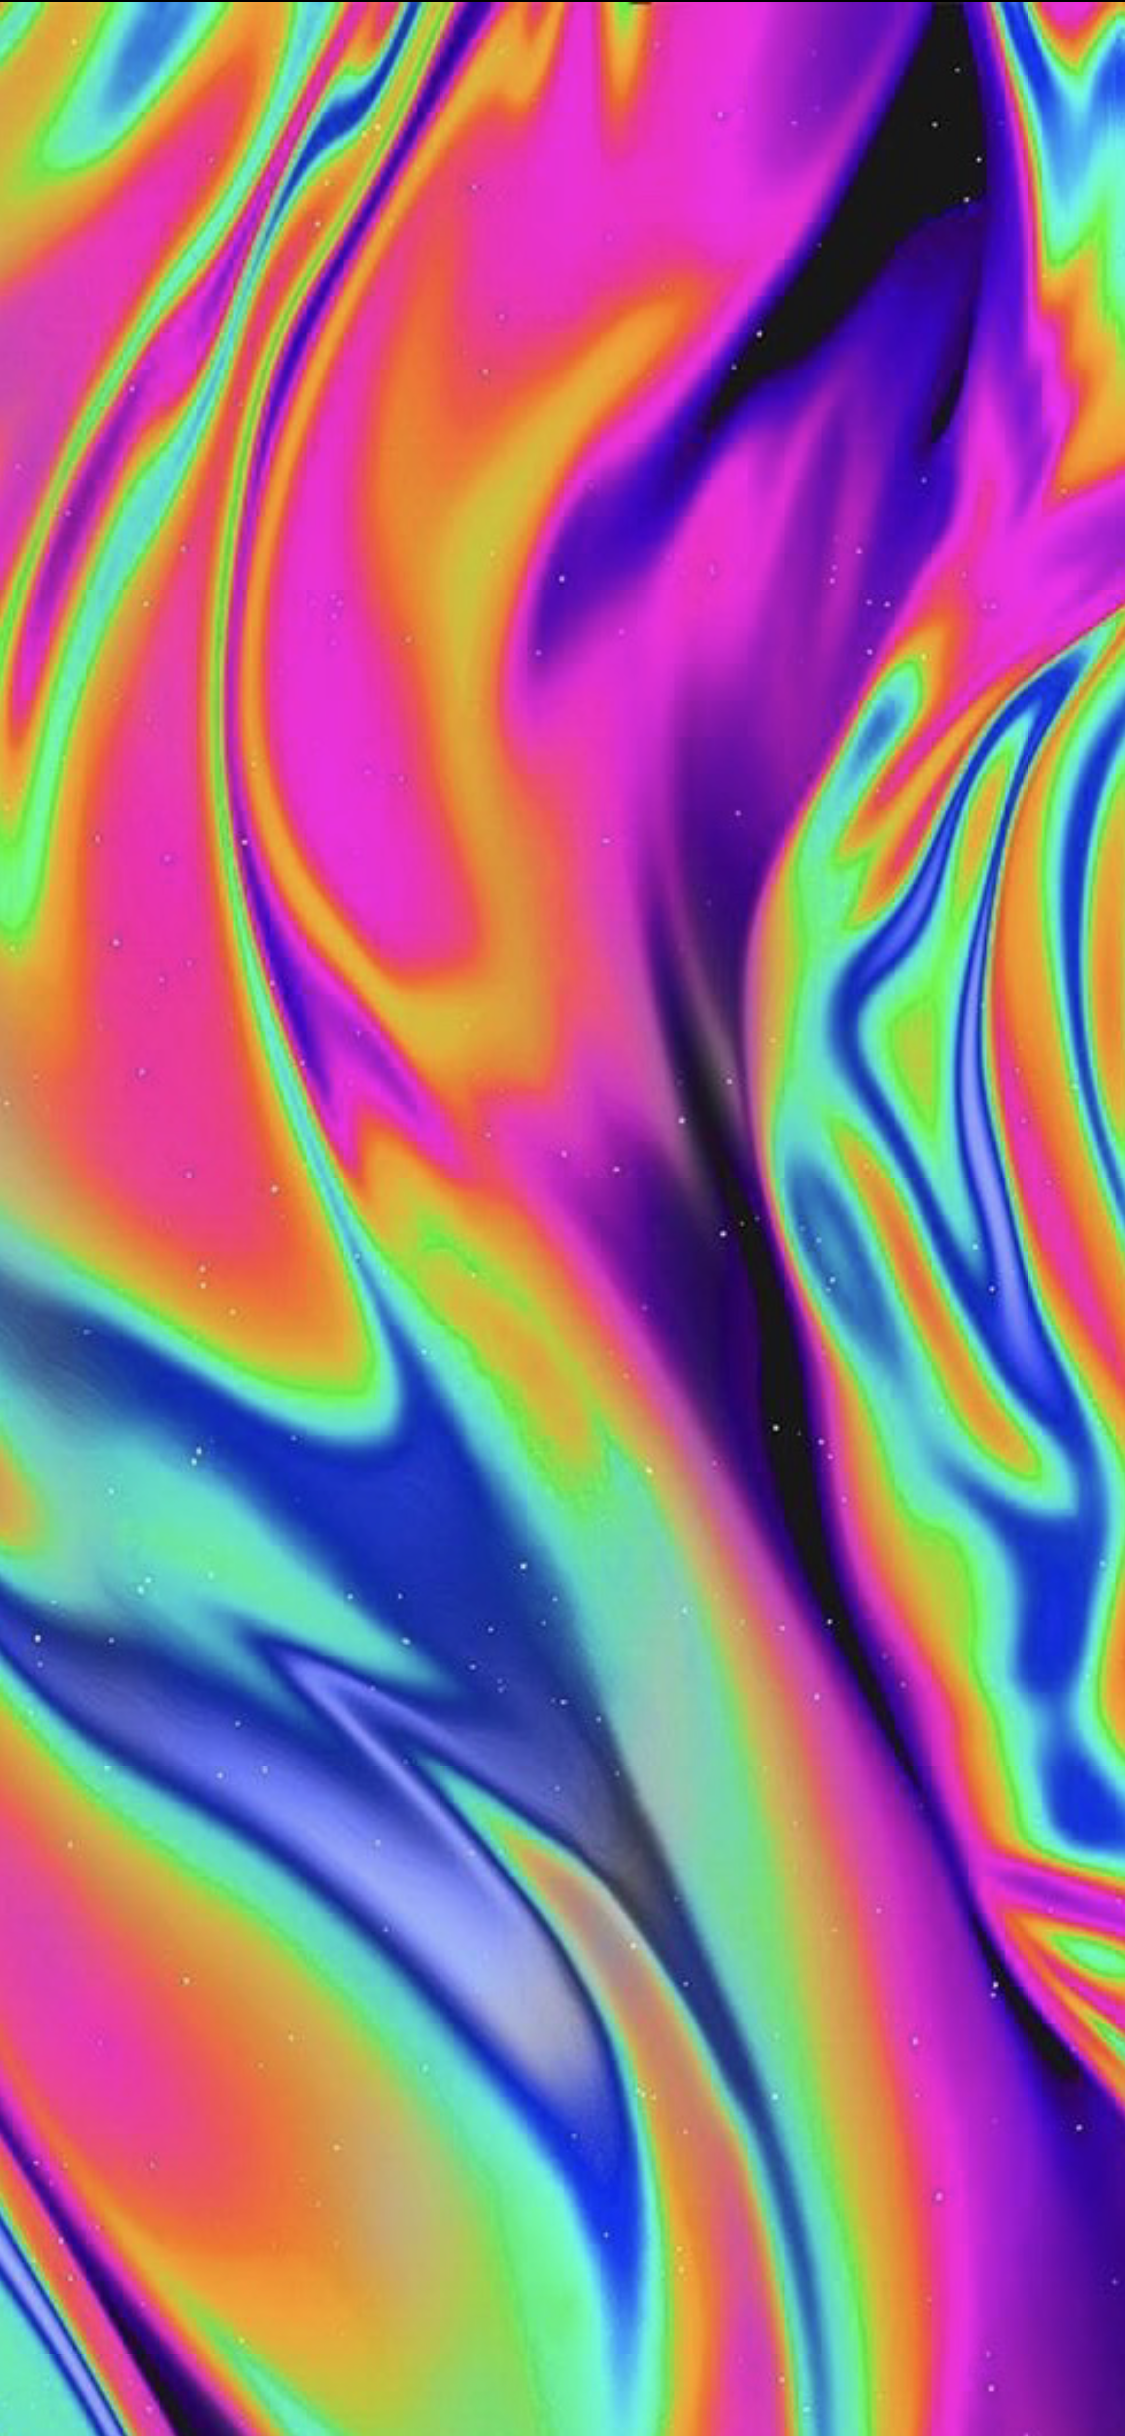 liquid #fluid #lines #stains #structures #art #design #wavy #abstract #colorful #rainbow D #wall #ipho. Rainbow wallpaper, Colorful wallpaper, Cool background